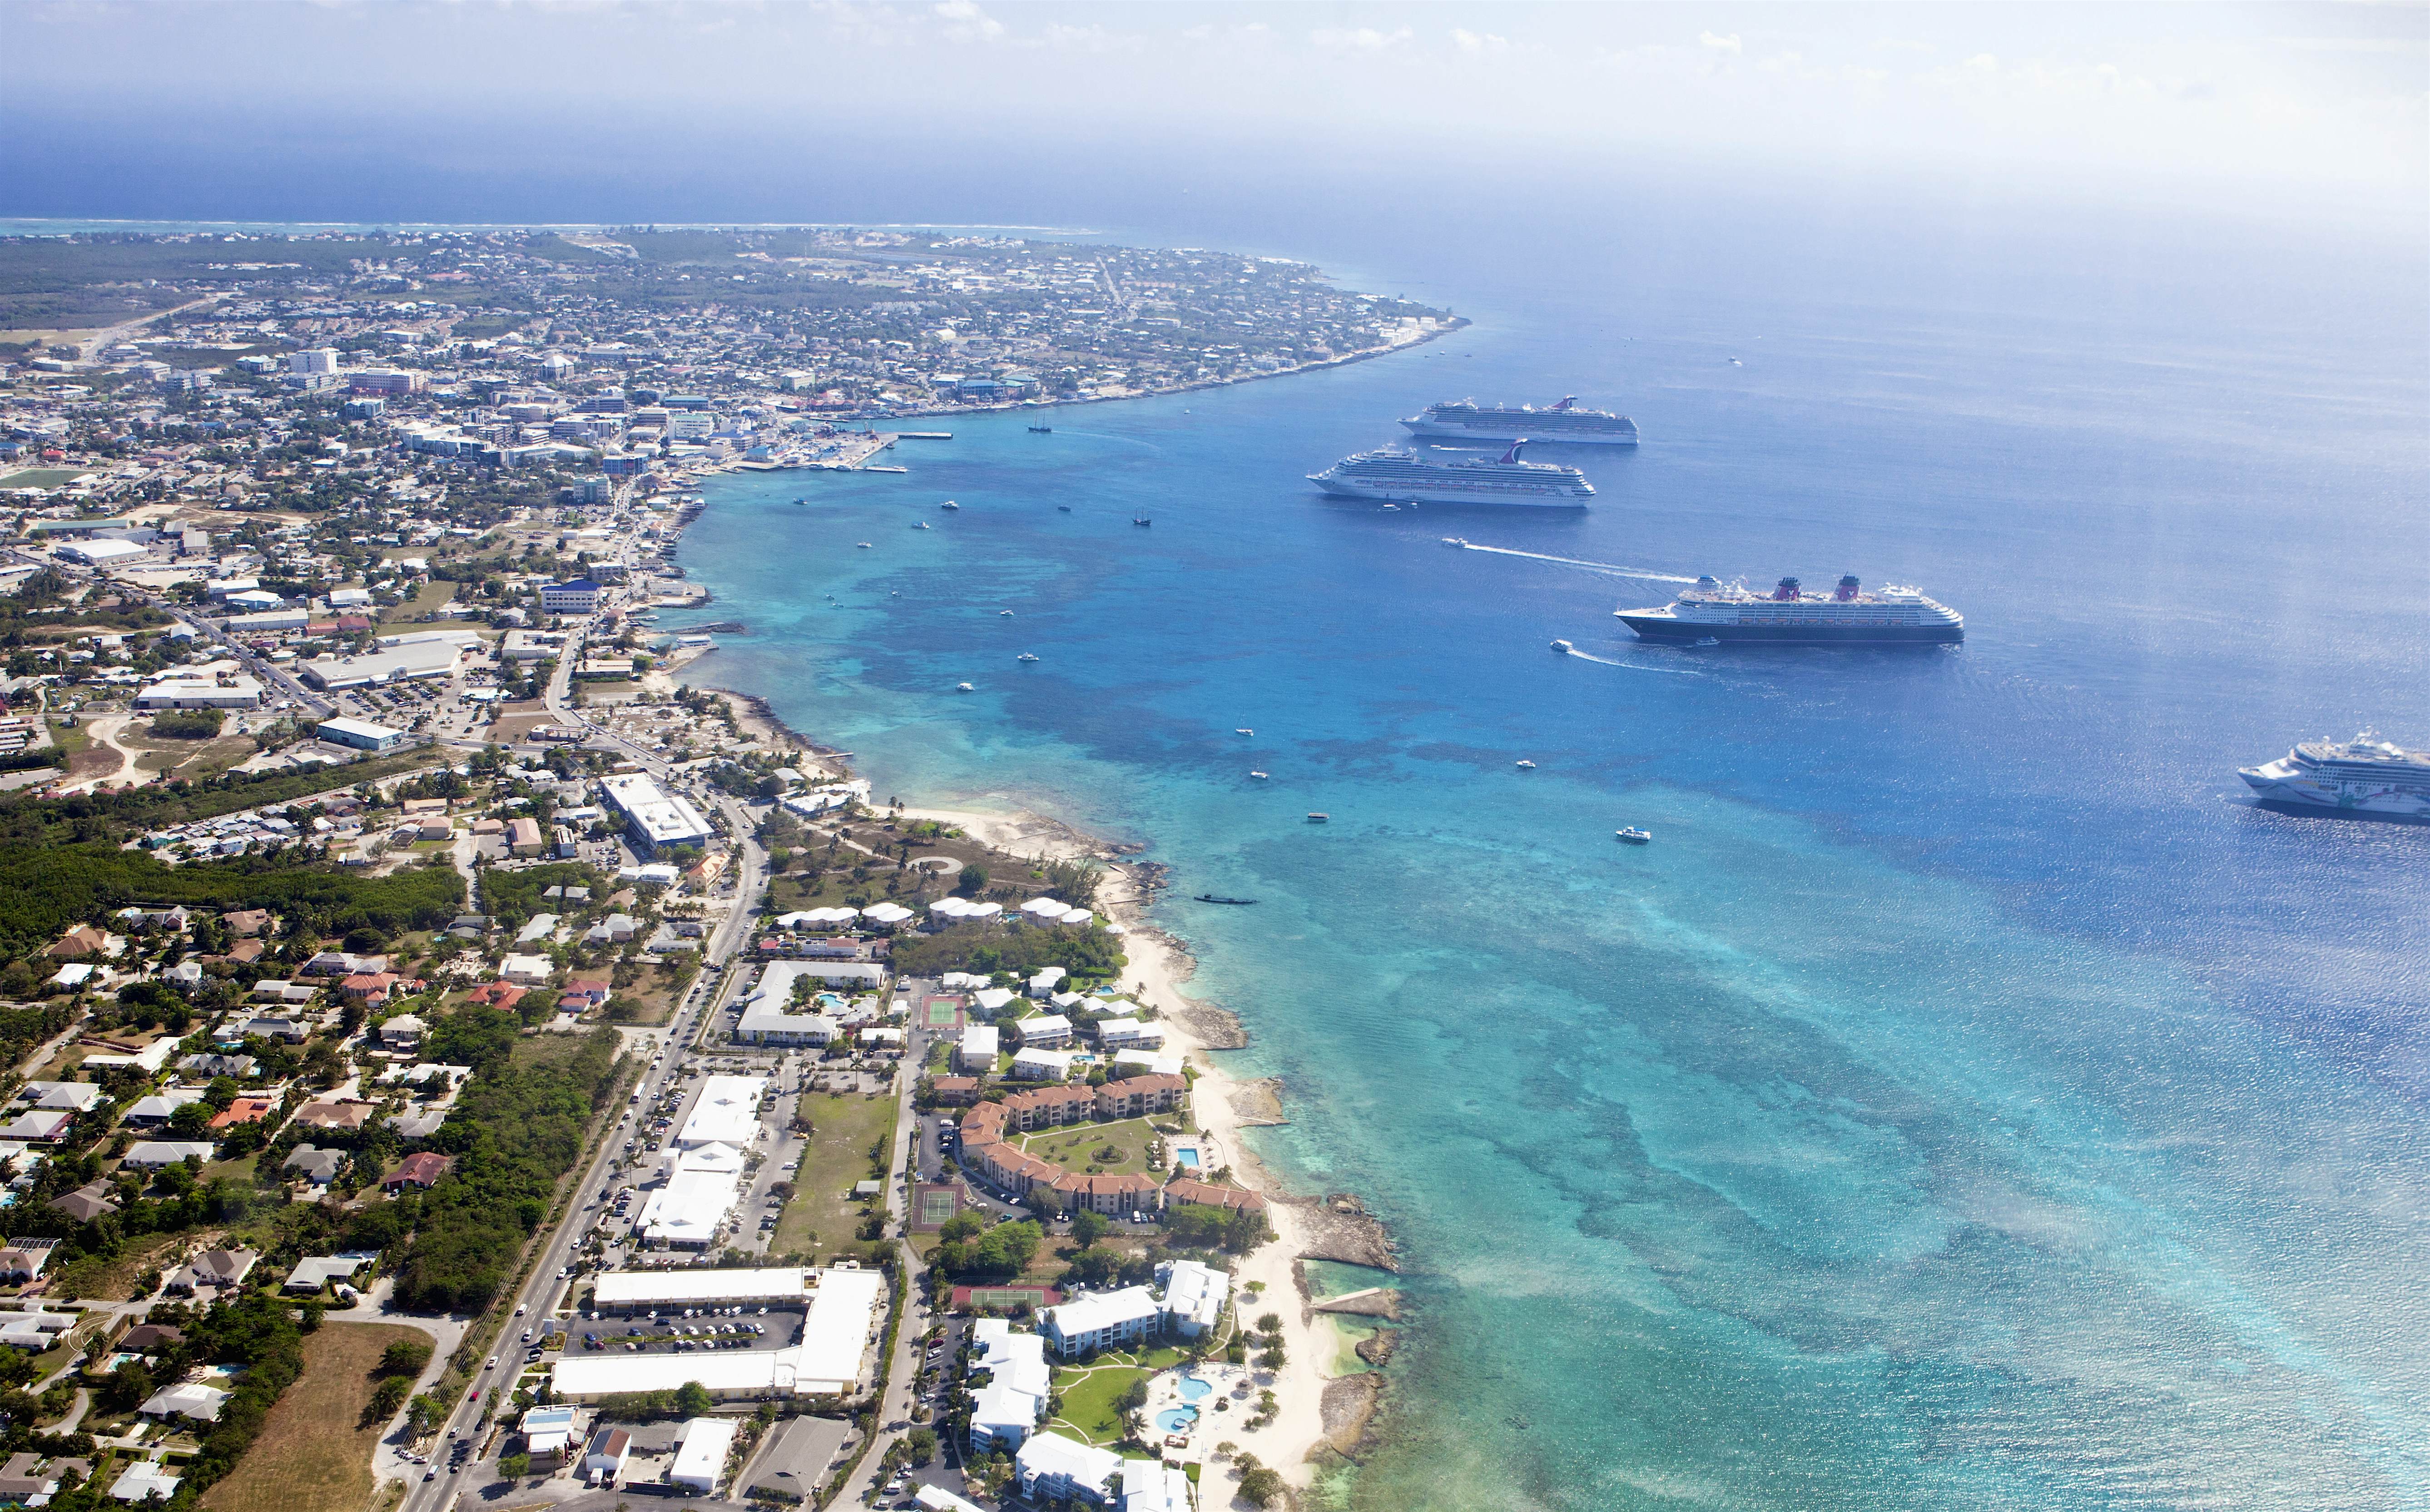 Cayman Islands travel | Caribbean - Lonely Planet